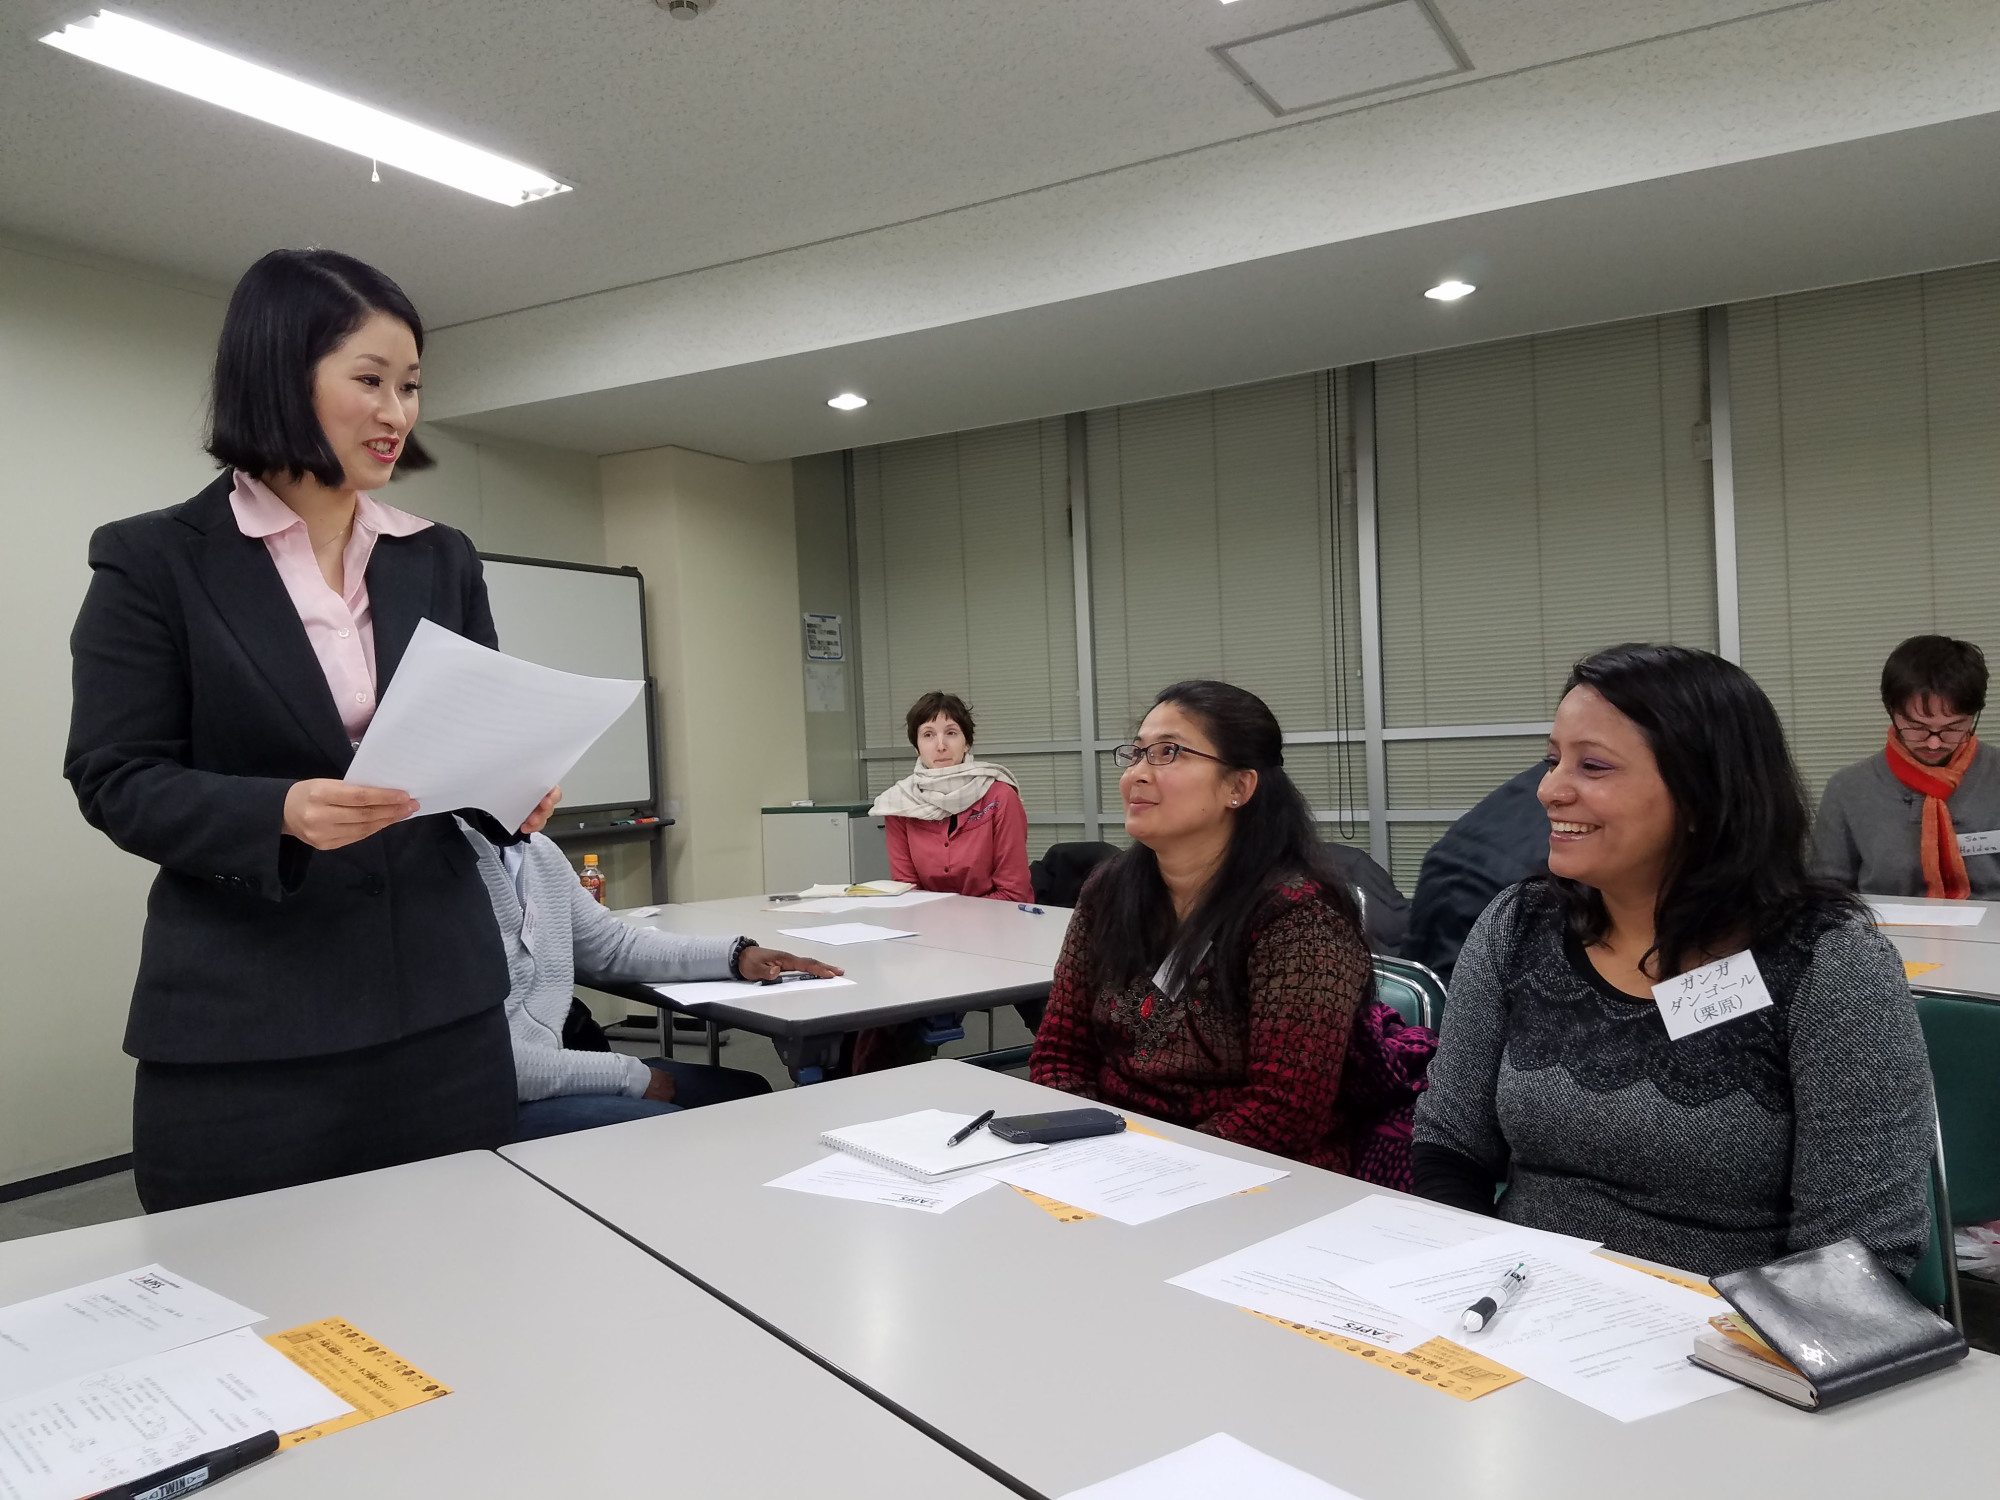 Foreign volunteers hone their translation skills in a class taught by a professional interpreter in Itabashi Ward, Tokyo, on Saturday &#8212; the latest in a series of workshops organized by the Asian People's Friendship Society. | TOMOHIRO OSAKI